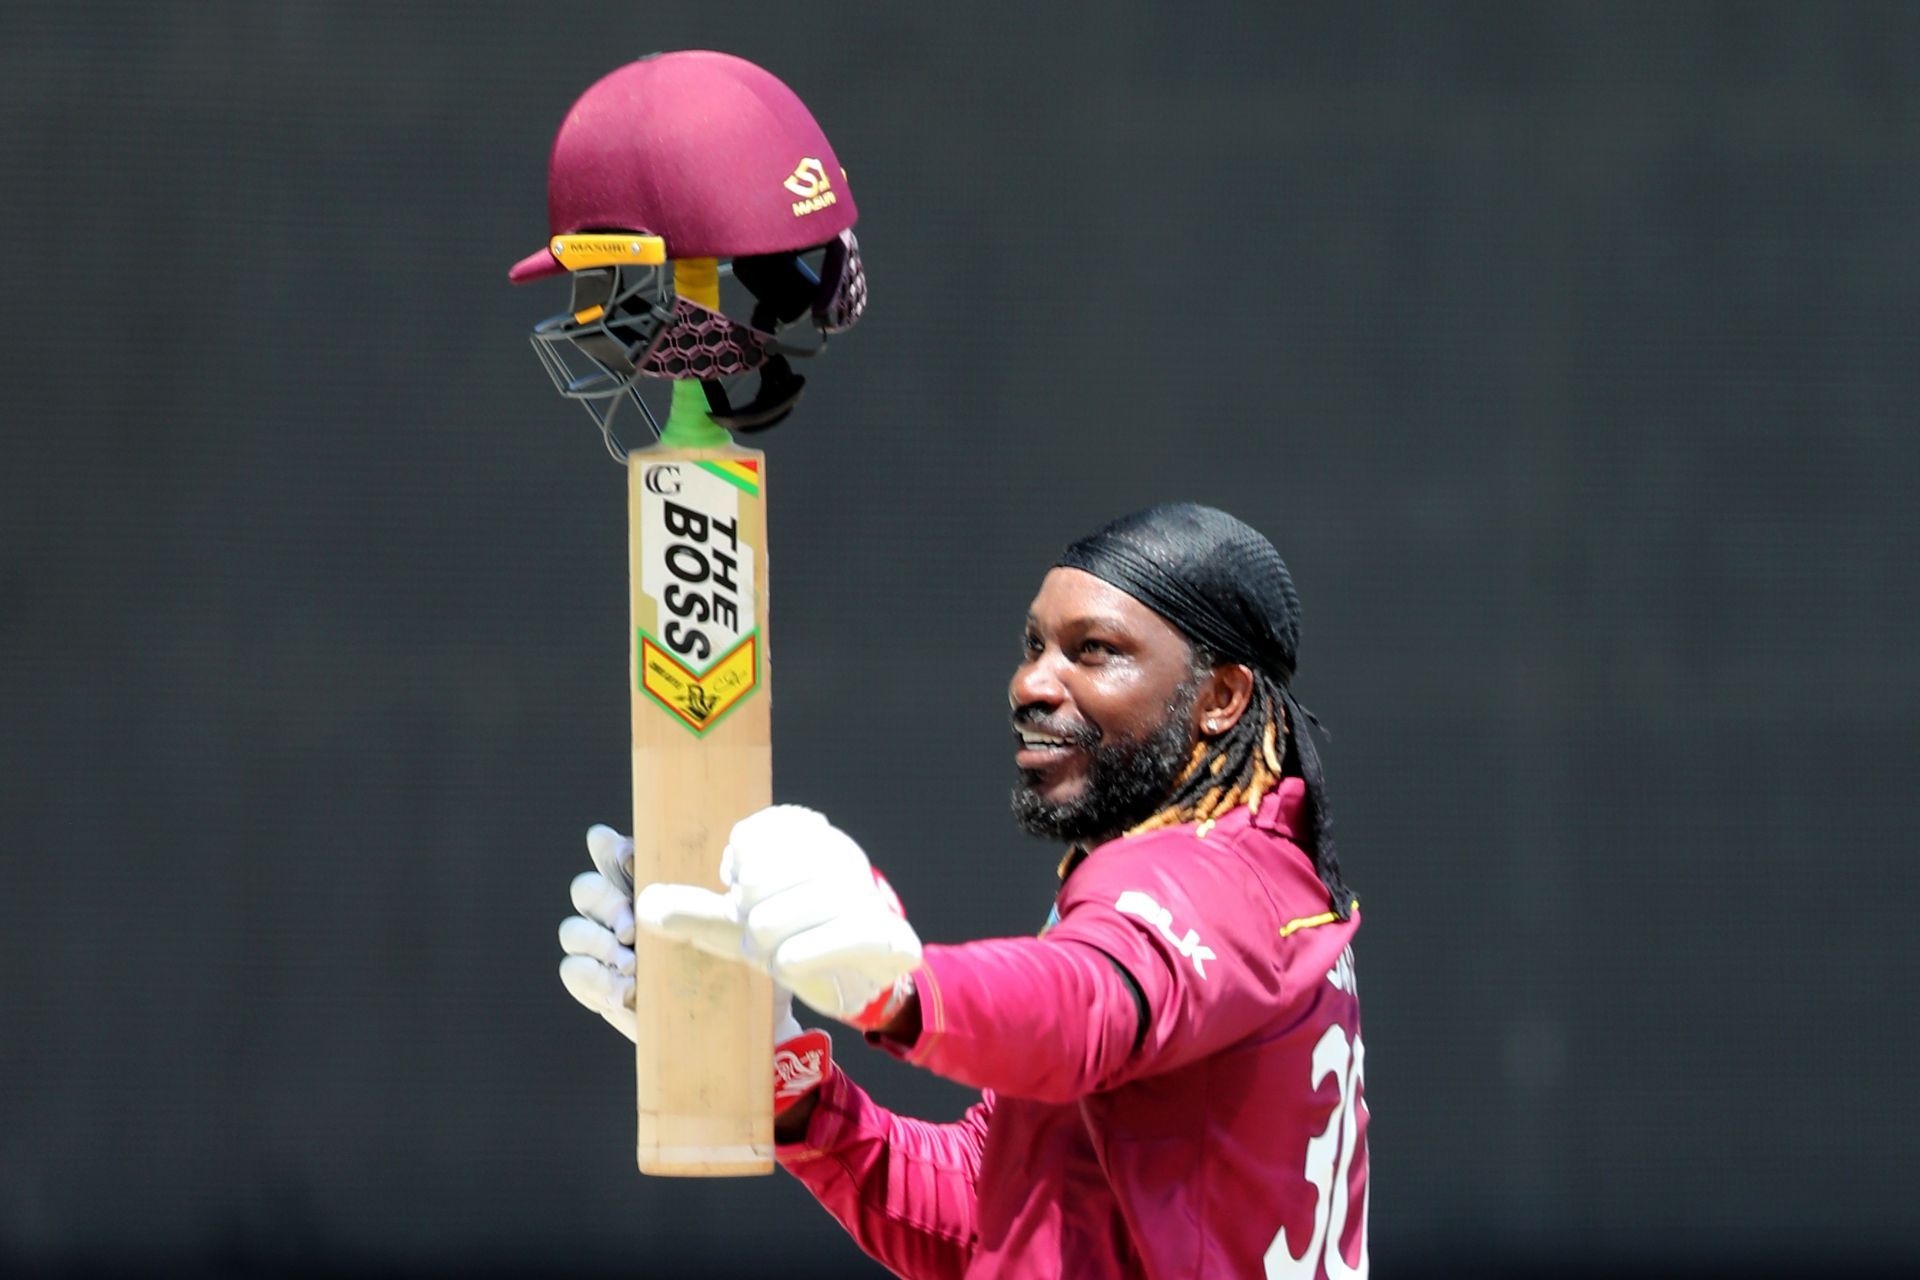 Can Chris Gayle turn back the clock one final time?